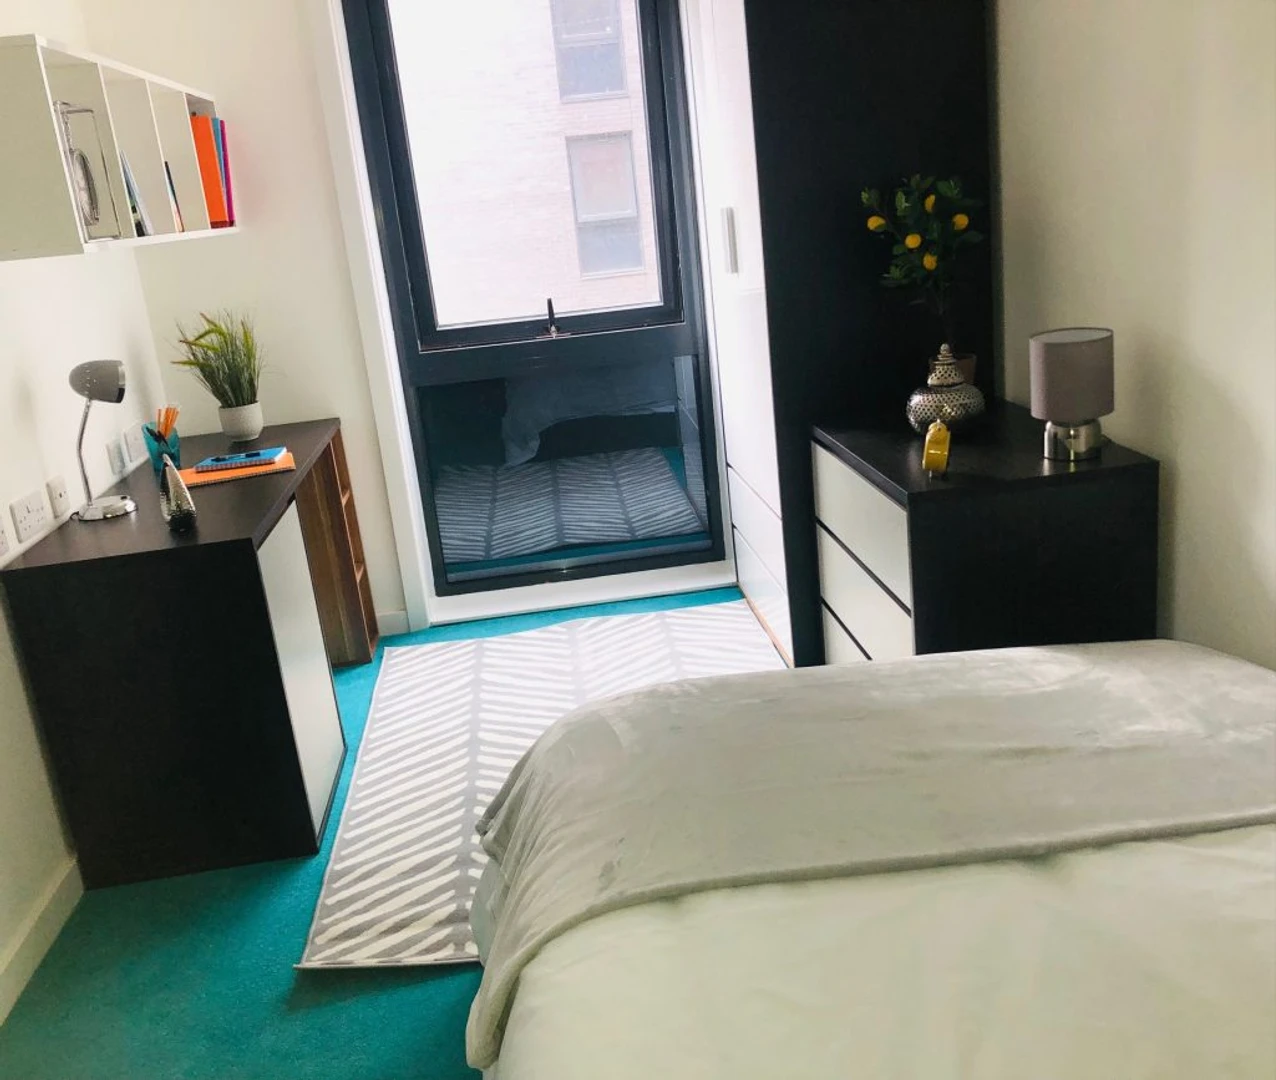 Room for rent in a shared flat in Sheffield